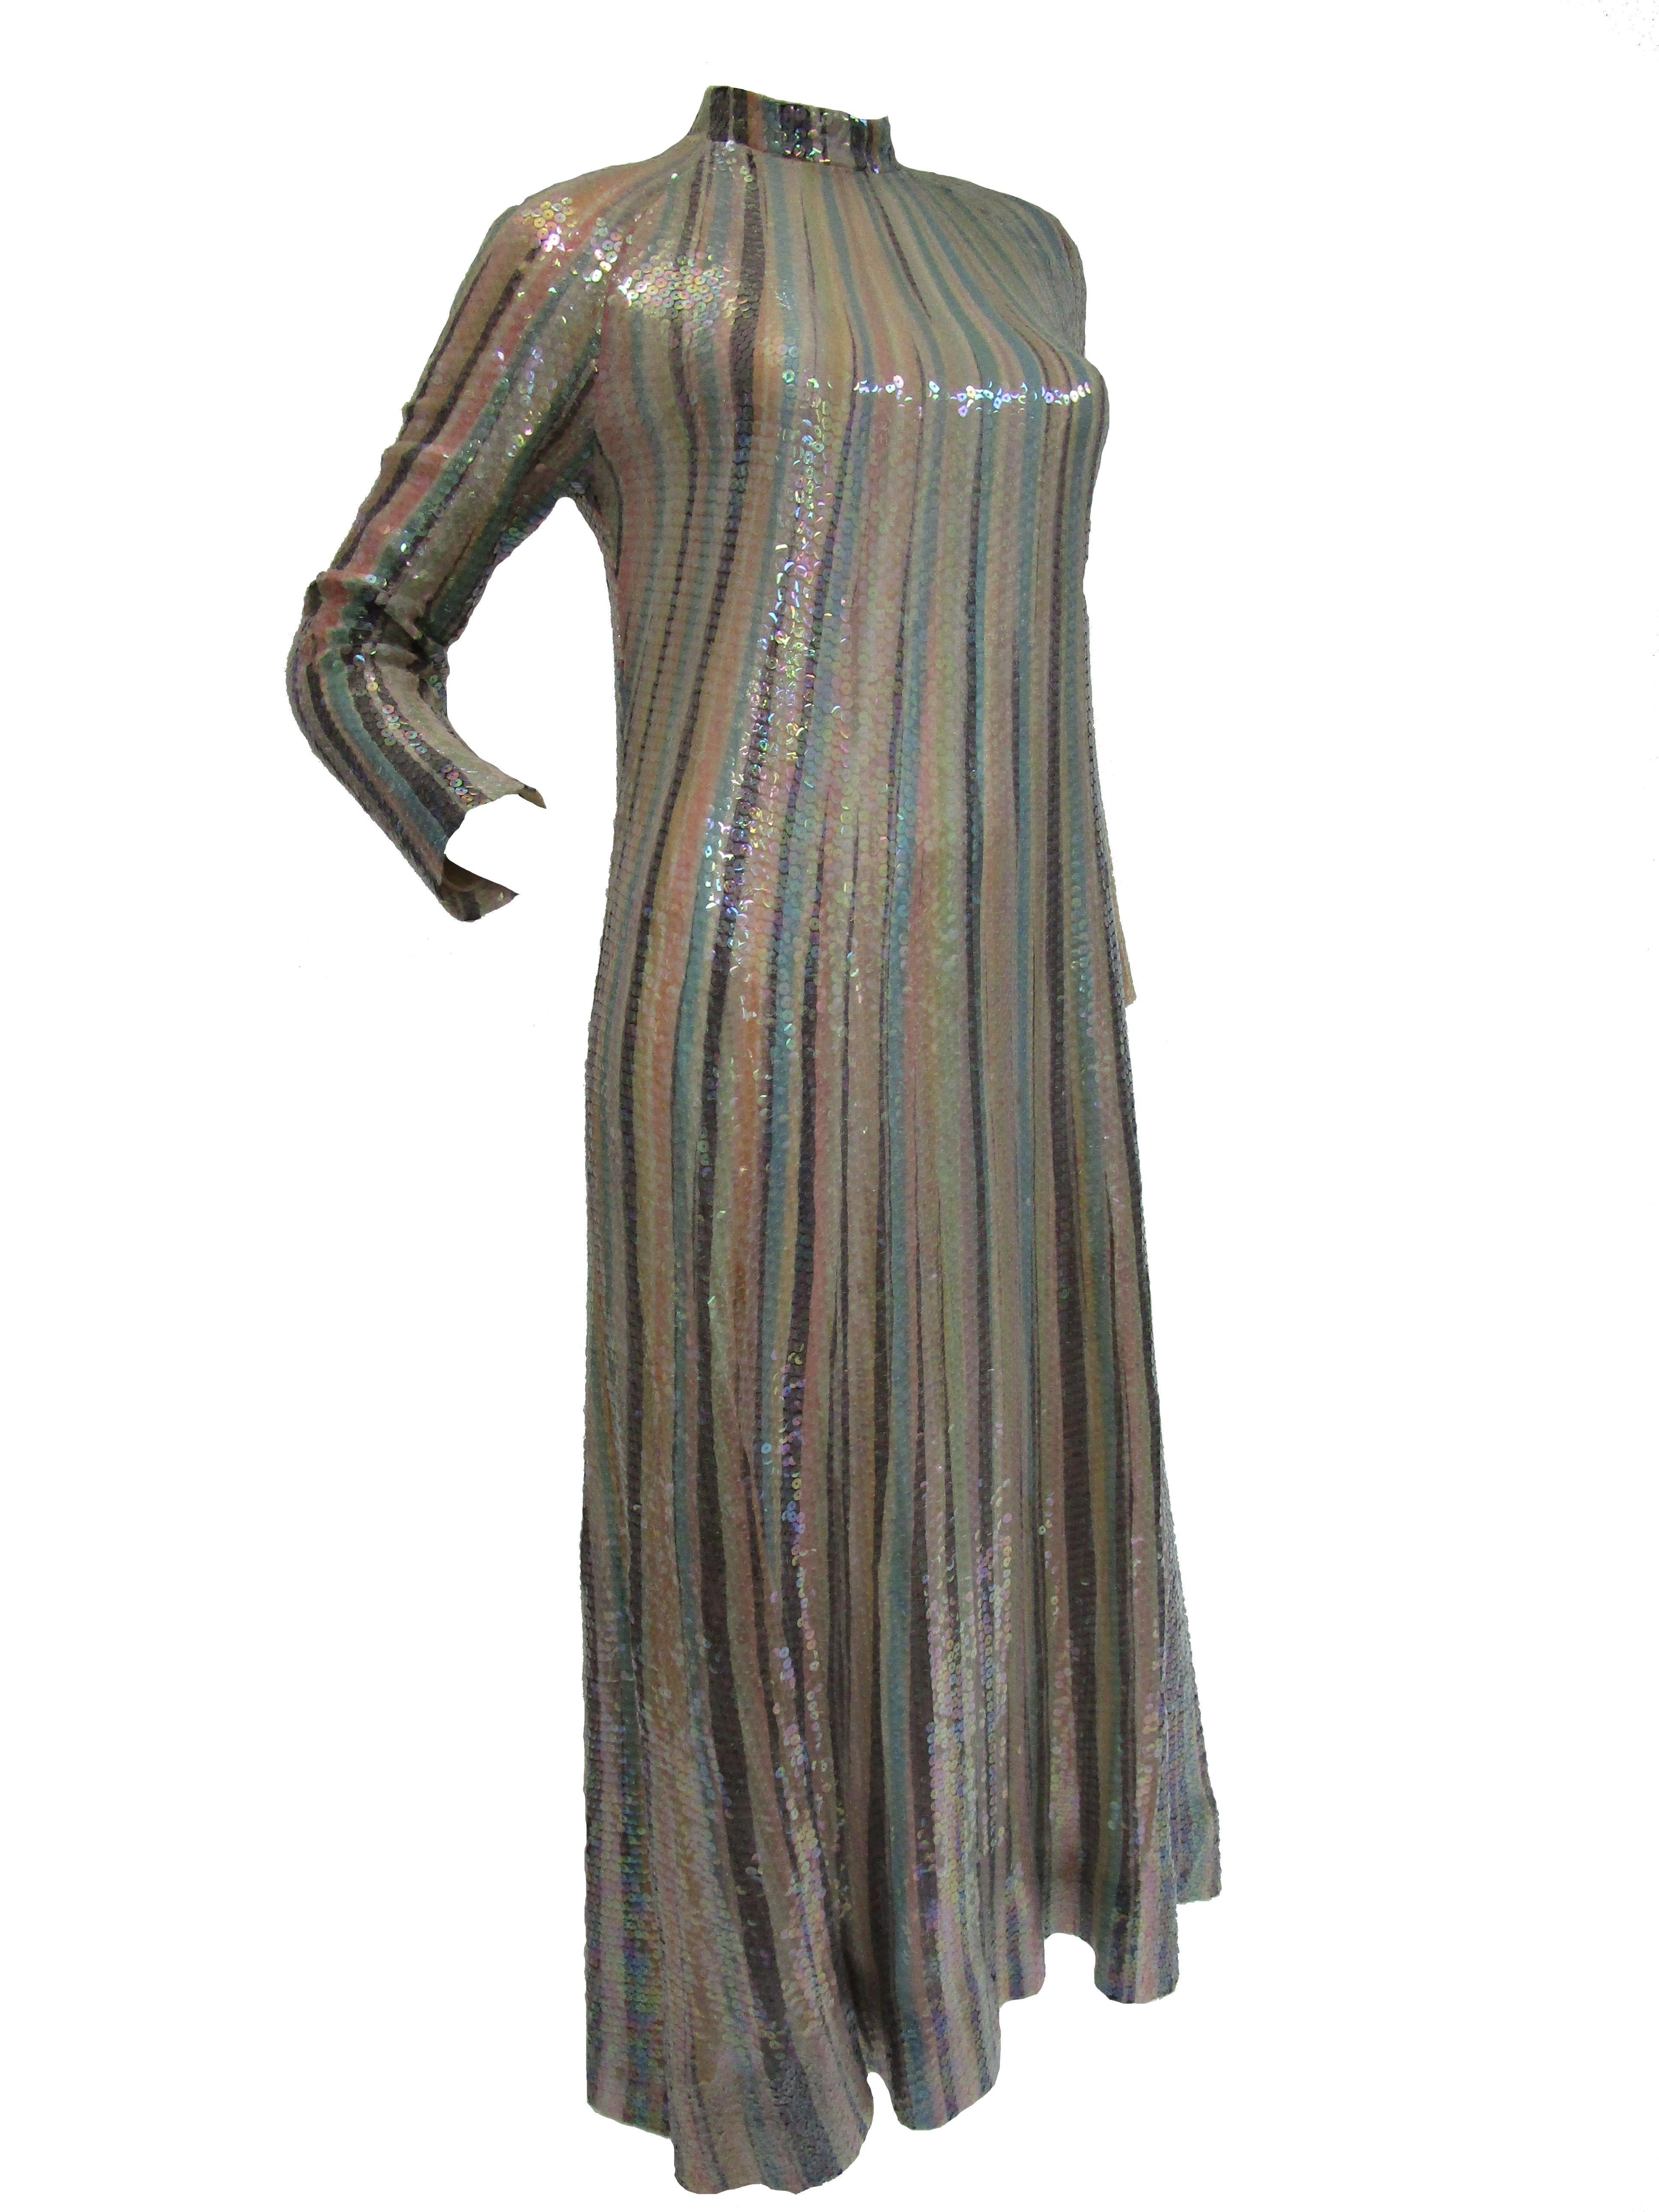 
Dazzling clear sequined dress by Halston! This full length dress includes a high neck and 14